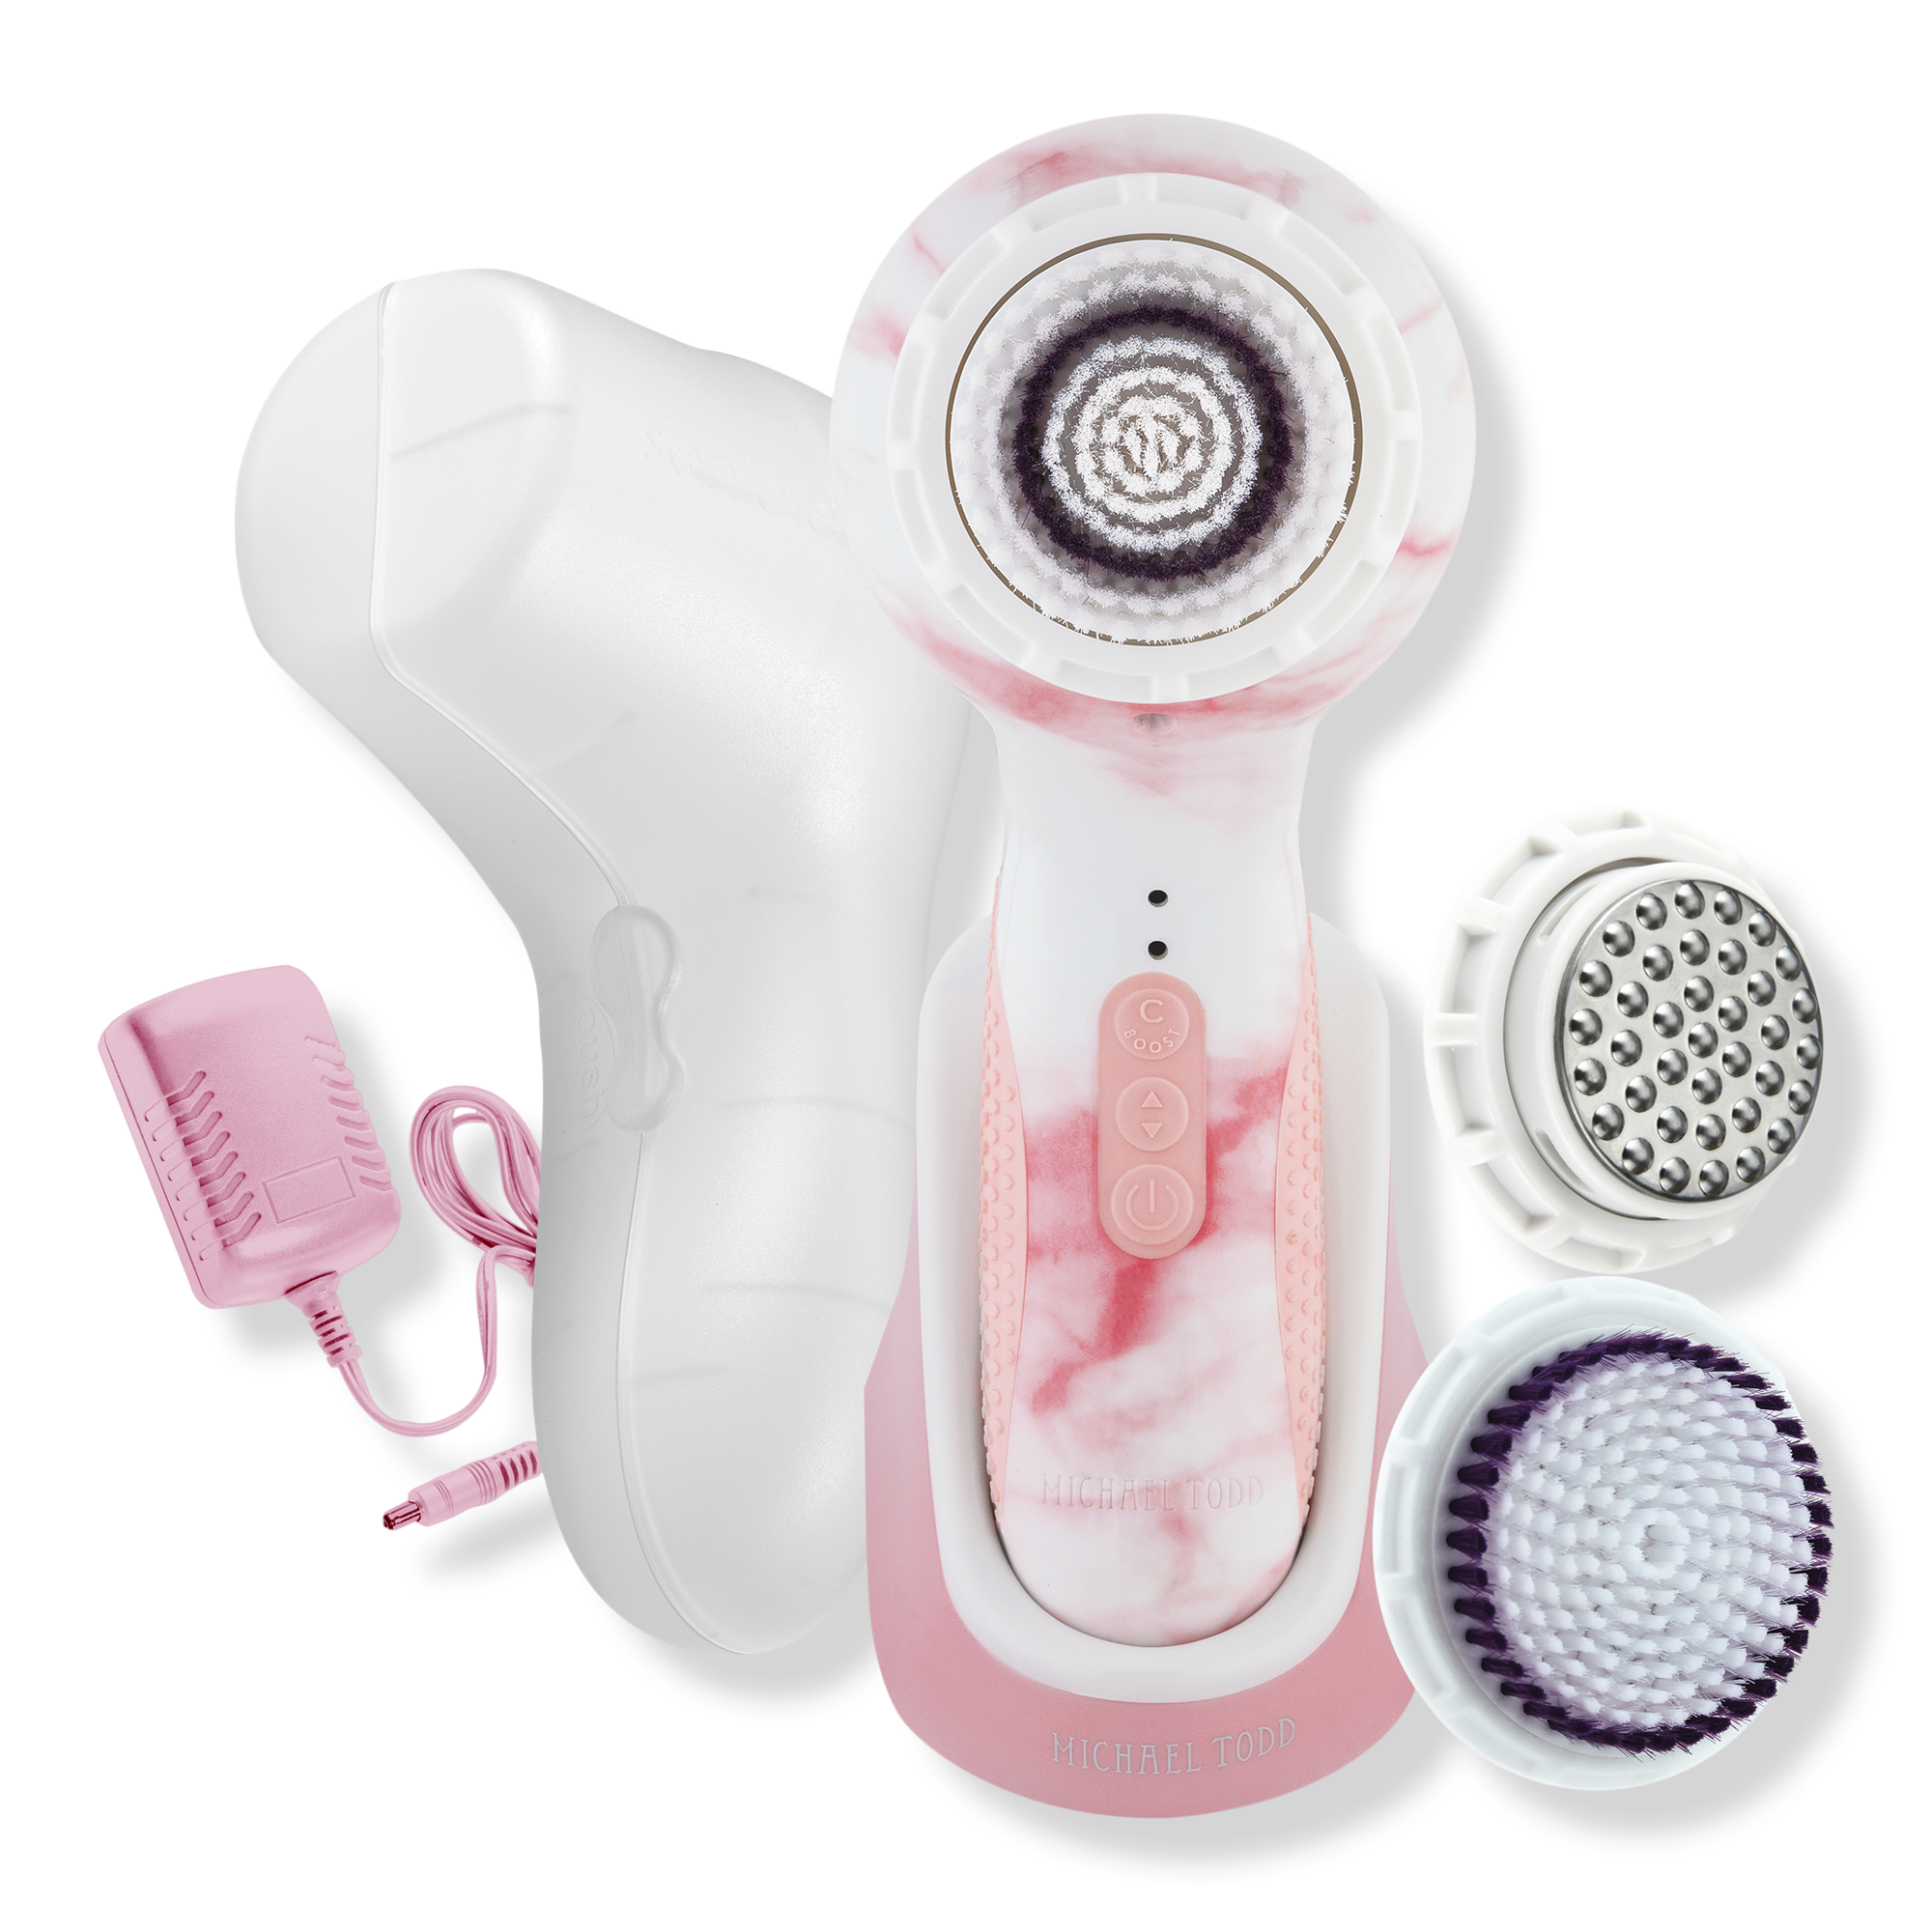 Soniclear Elite Patented Face and Body Antimicrobial Sonic Skin Cleansing System